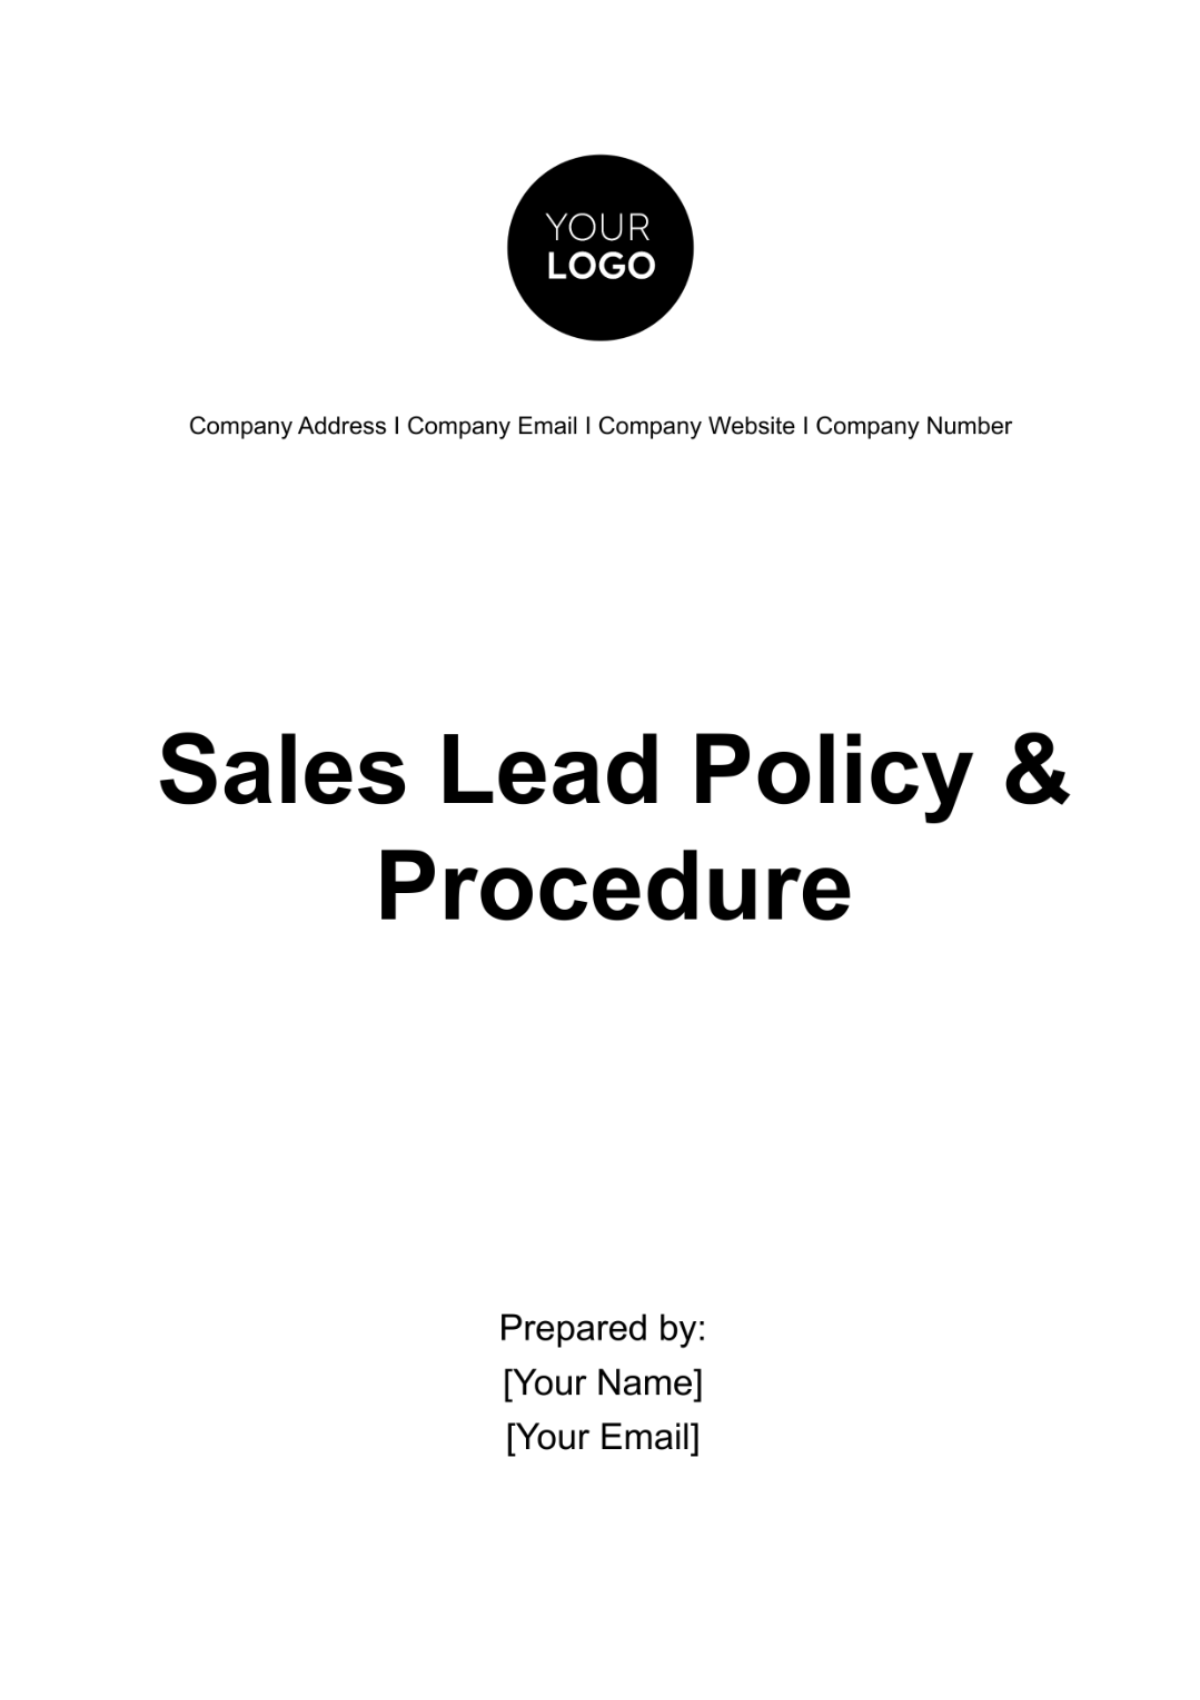 Sales Lead Policy & Procedure Template